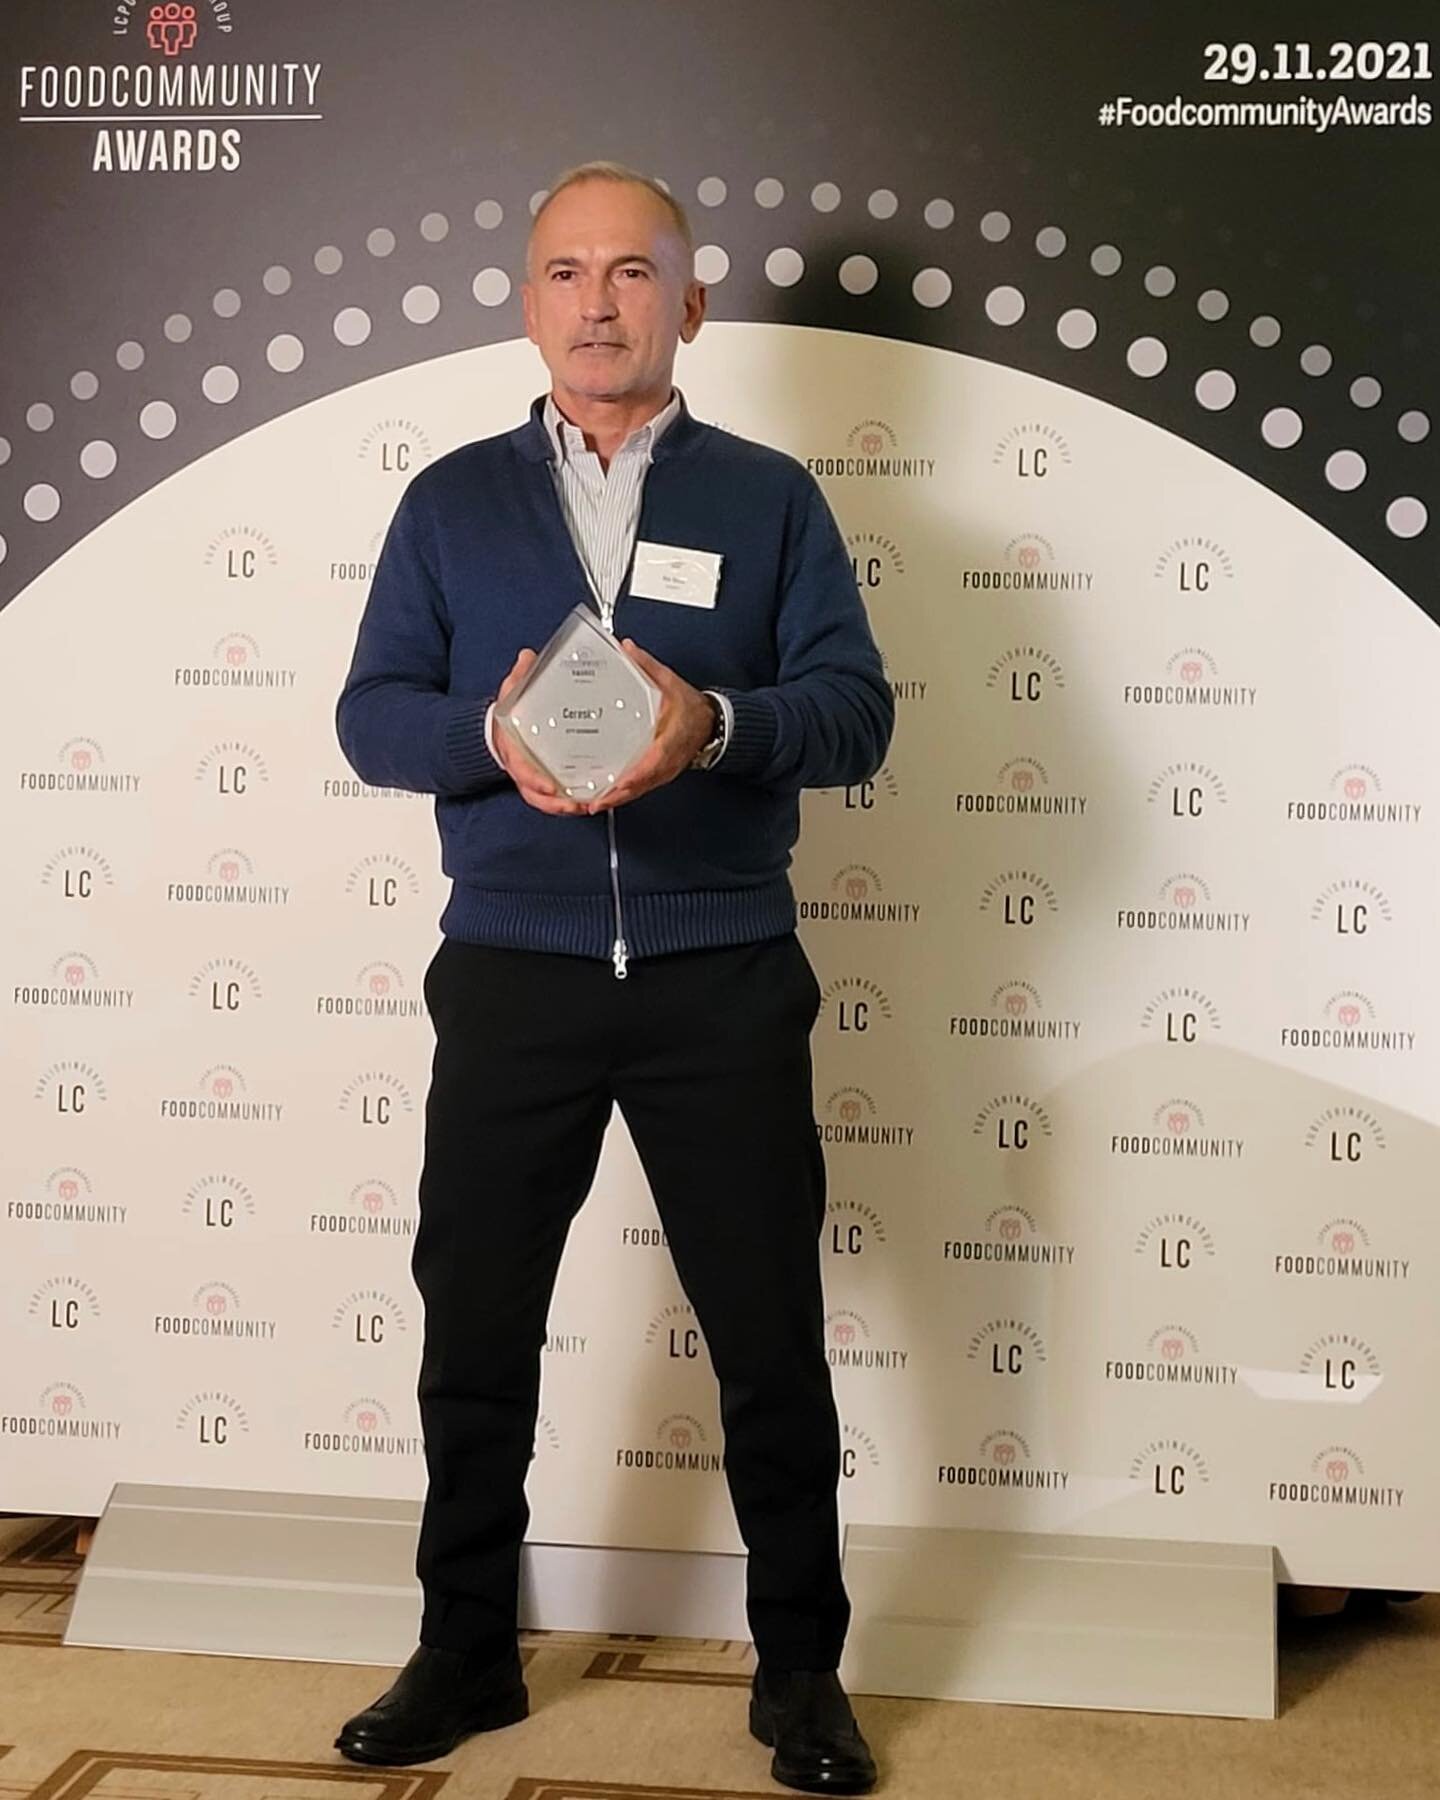 This morning our Chef @ElioSironi received the Award &rsquo;City Gourmand&rsquo; for @Ceresio7 Pools &amp; Restaurant at the Food Community Awards @foodcommunity.it ✨